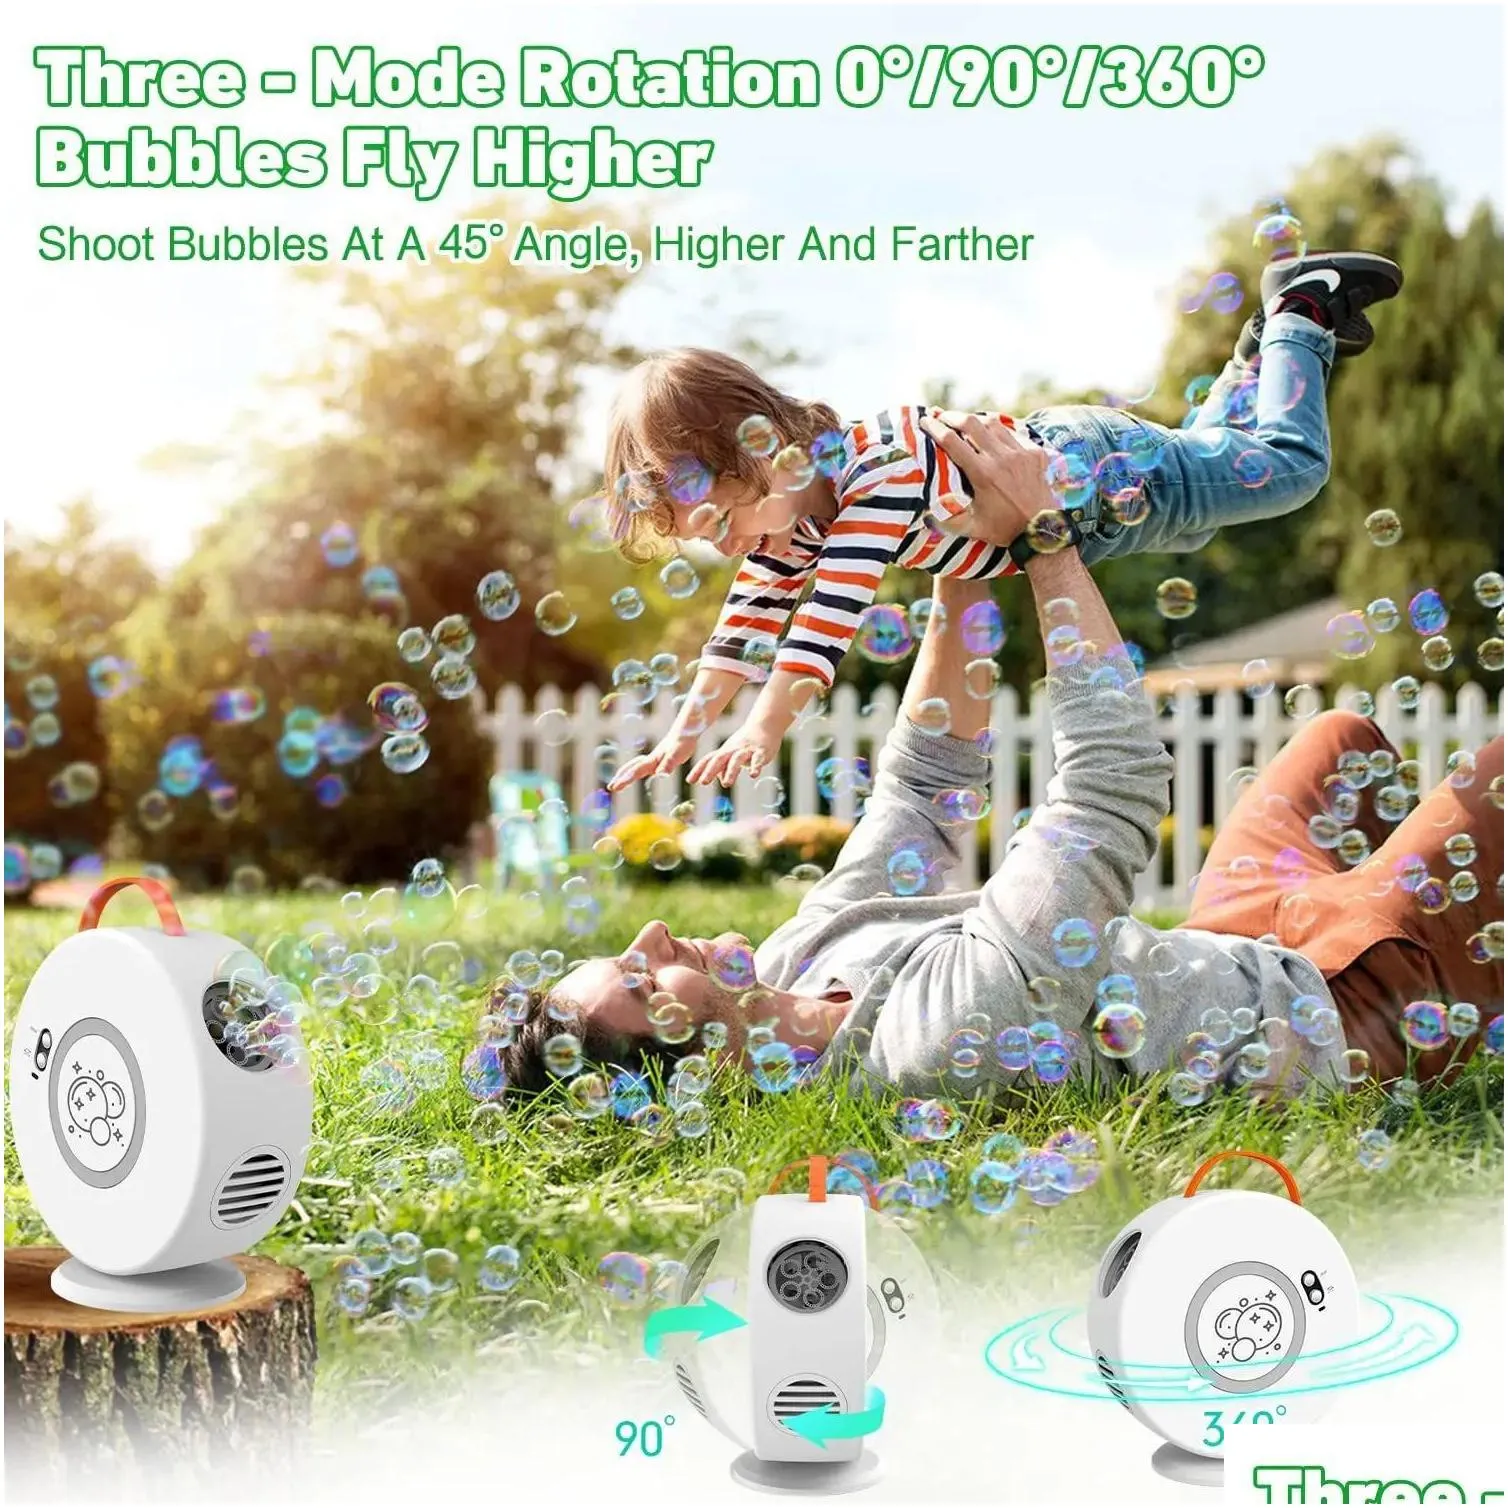 Novelty Games Matic Rotation Bubble Hine Astronauts Maker Blower With Led Light Soap Summer Toys 240329 Drop Delivery Gifts Gag Dh1Hp